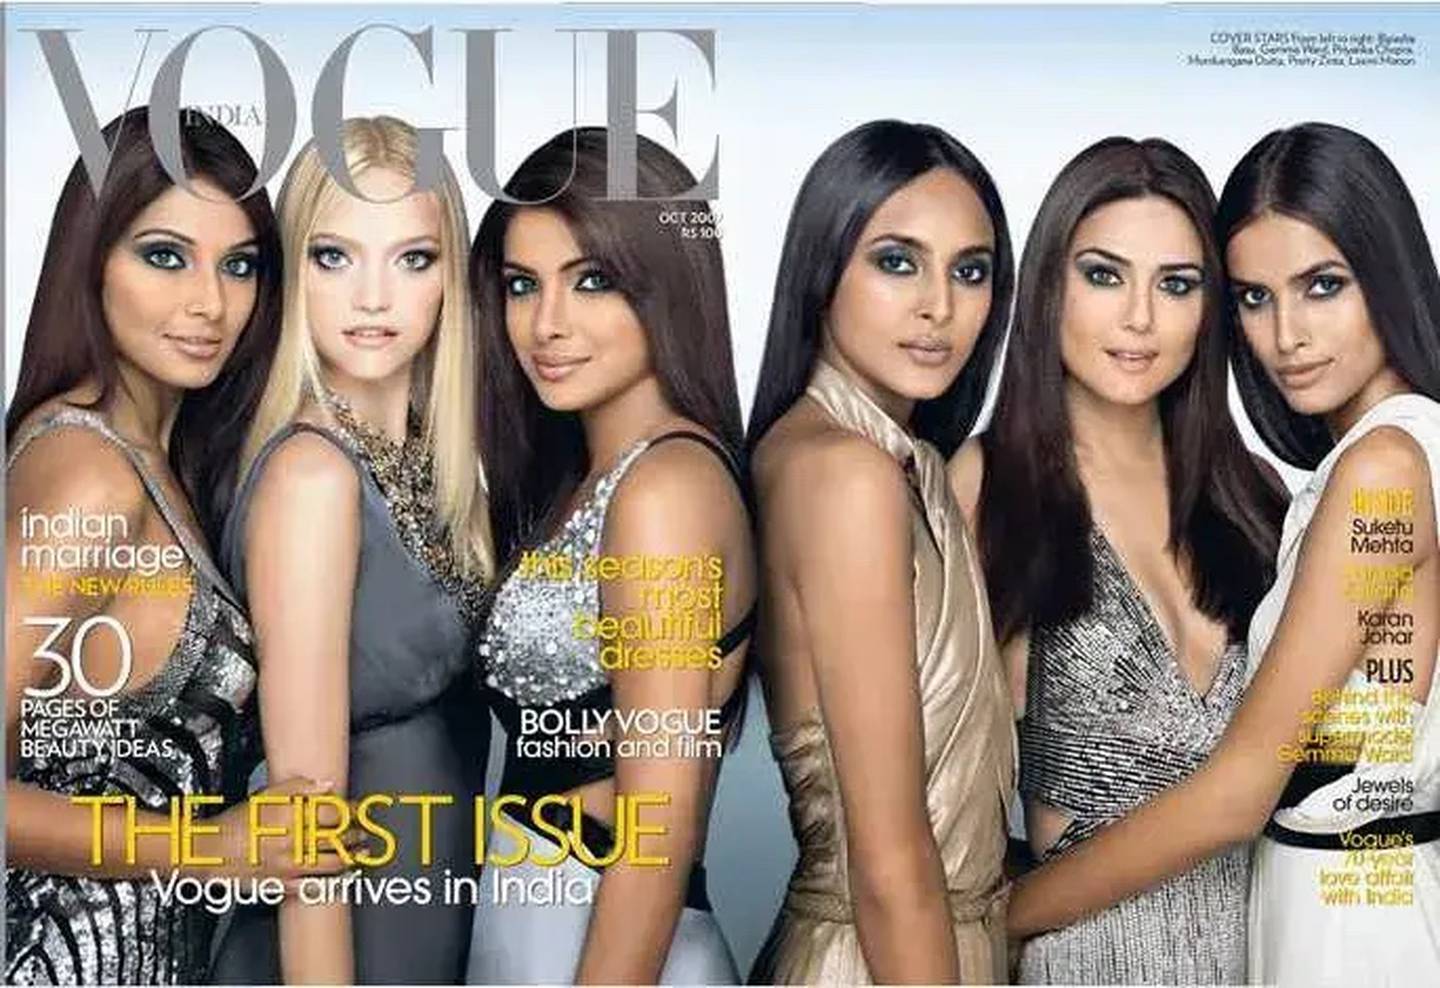 The first issue of Vogue India.